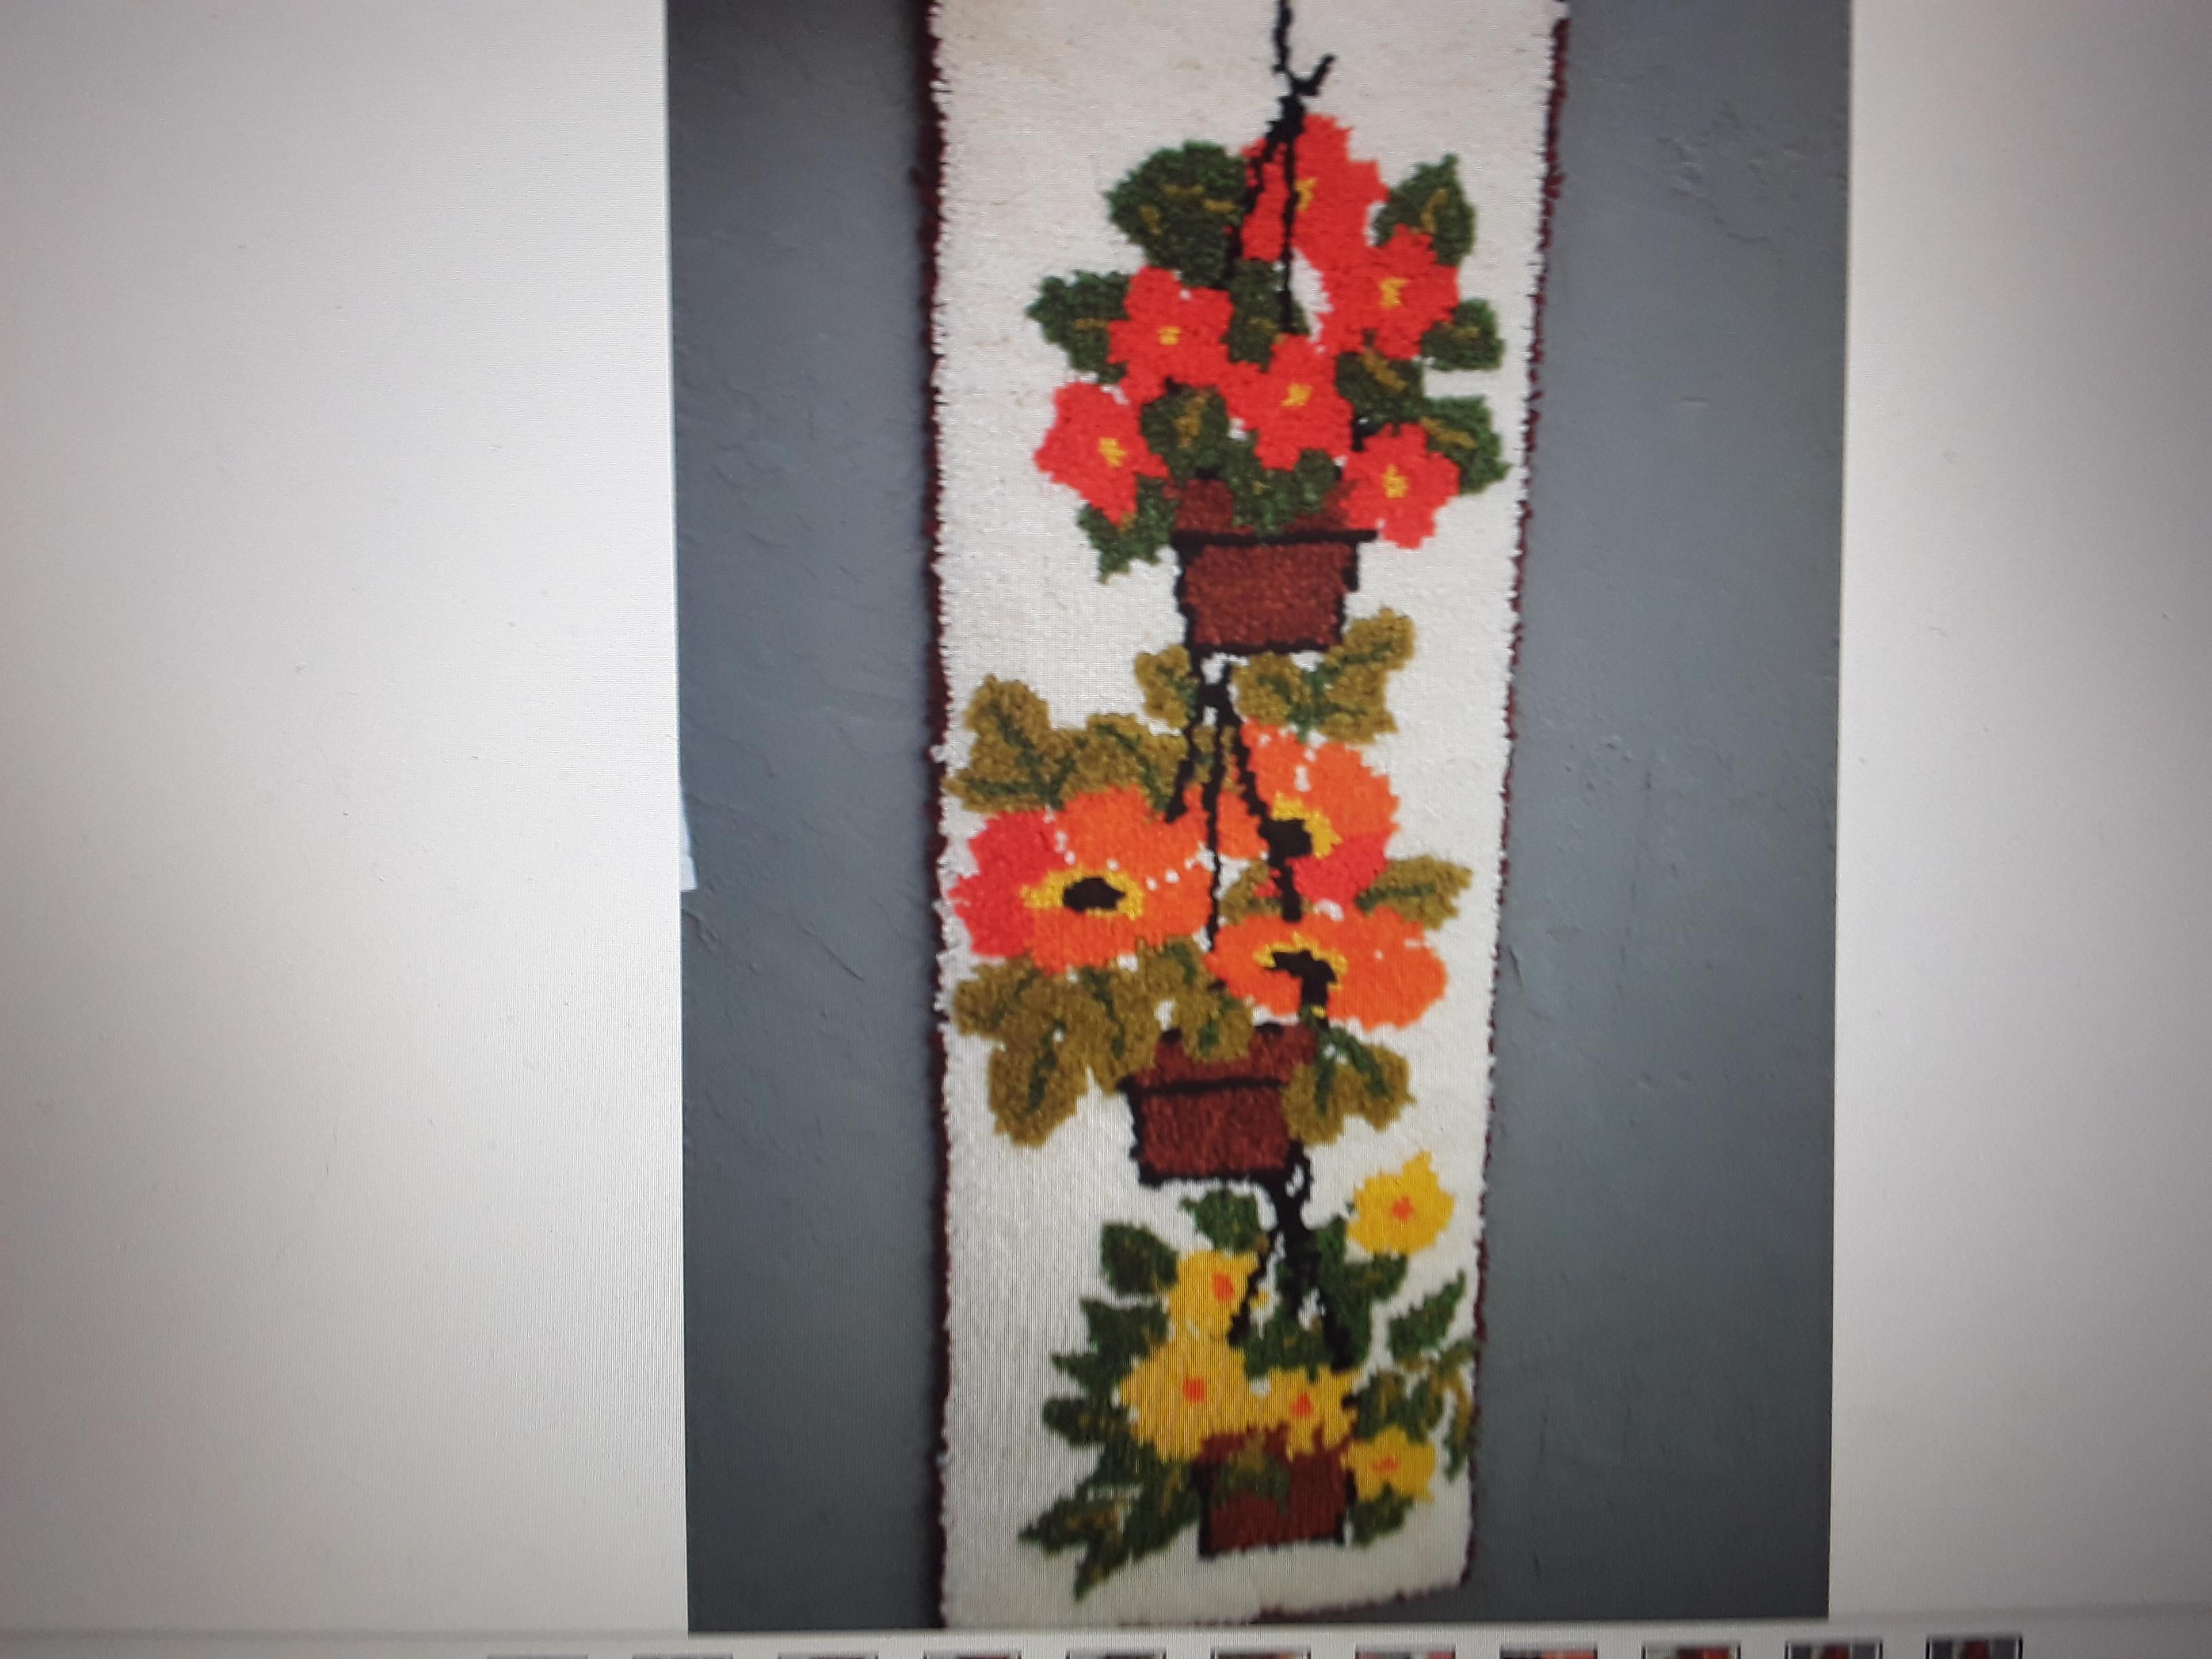 1960's Vintage Mid Century Modern Latchhooked Yarn Art of Potted Flowers. Pretty piece!